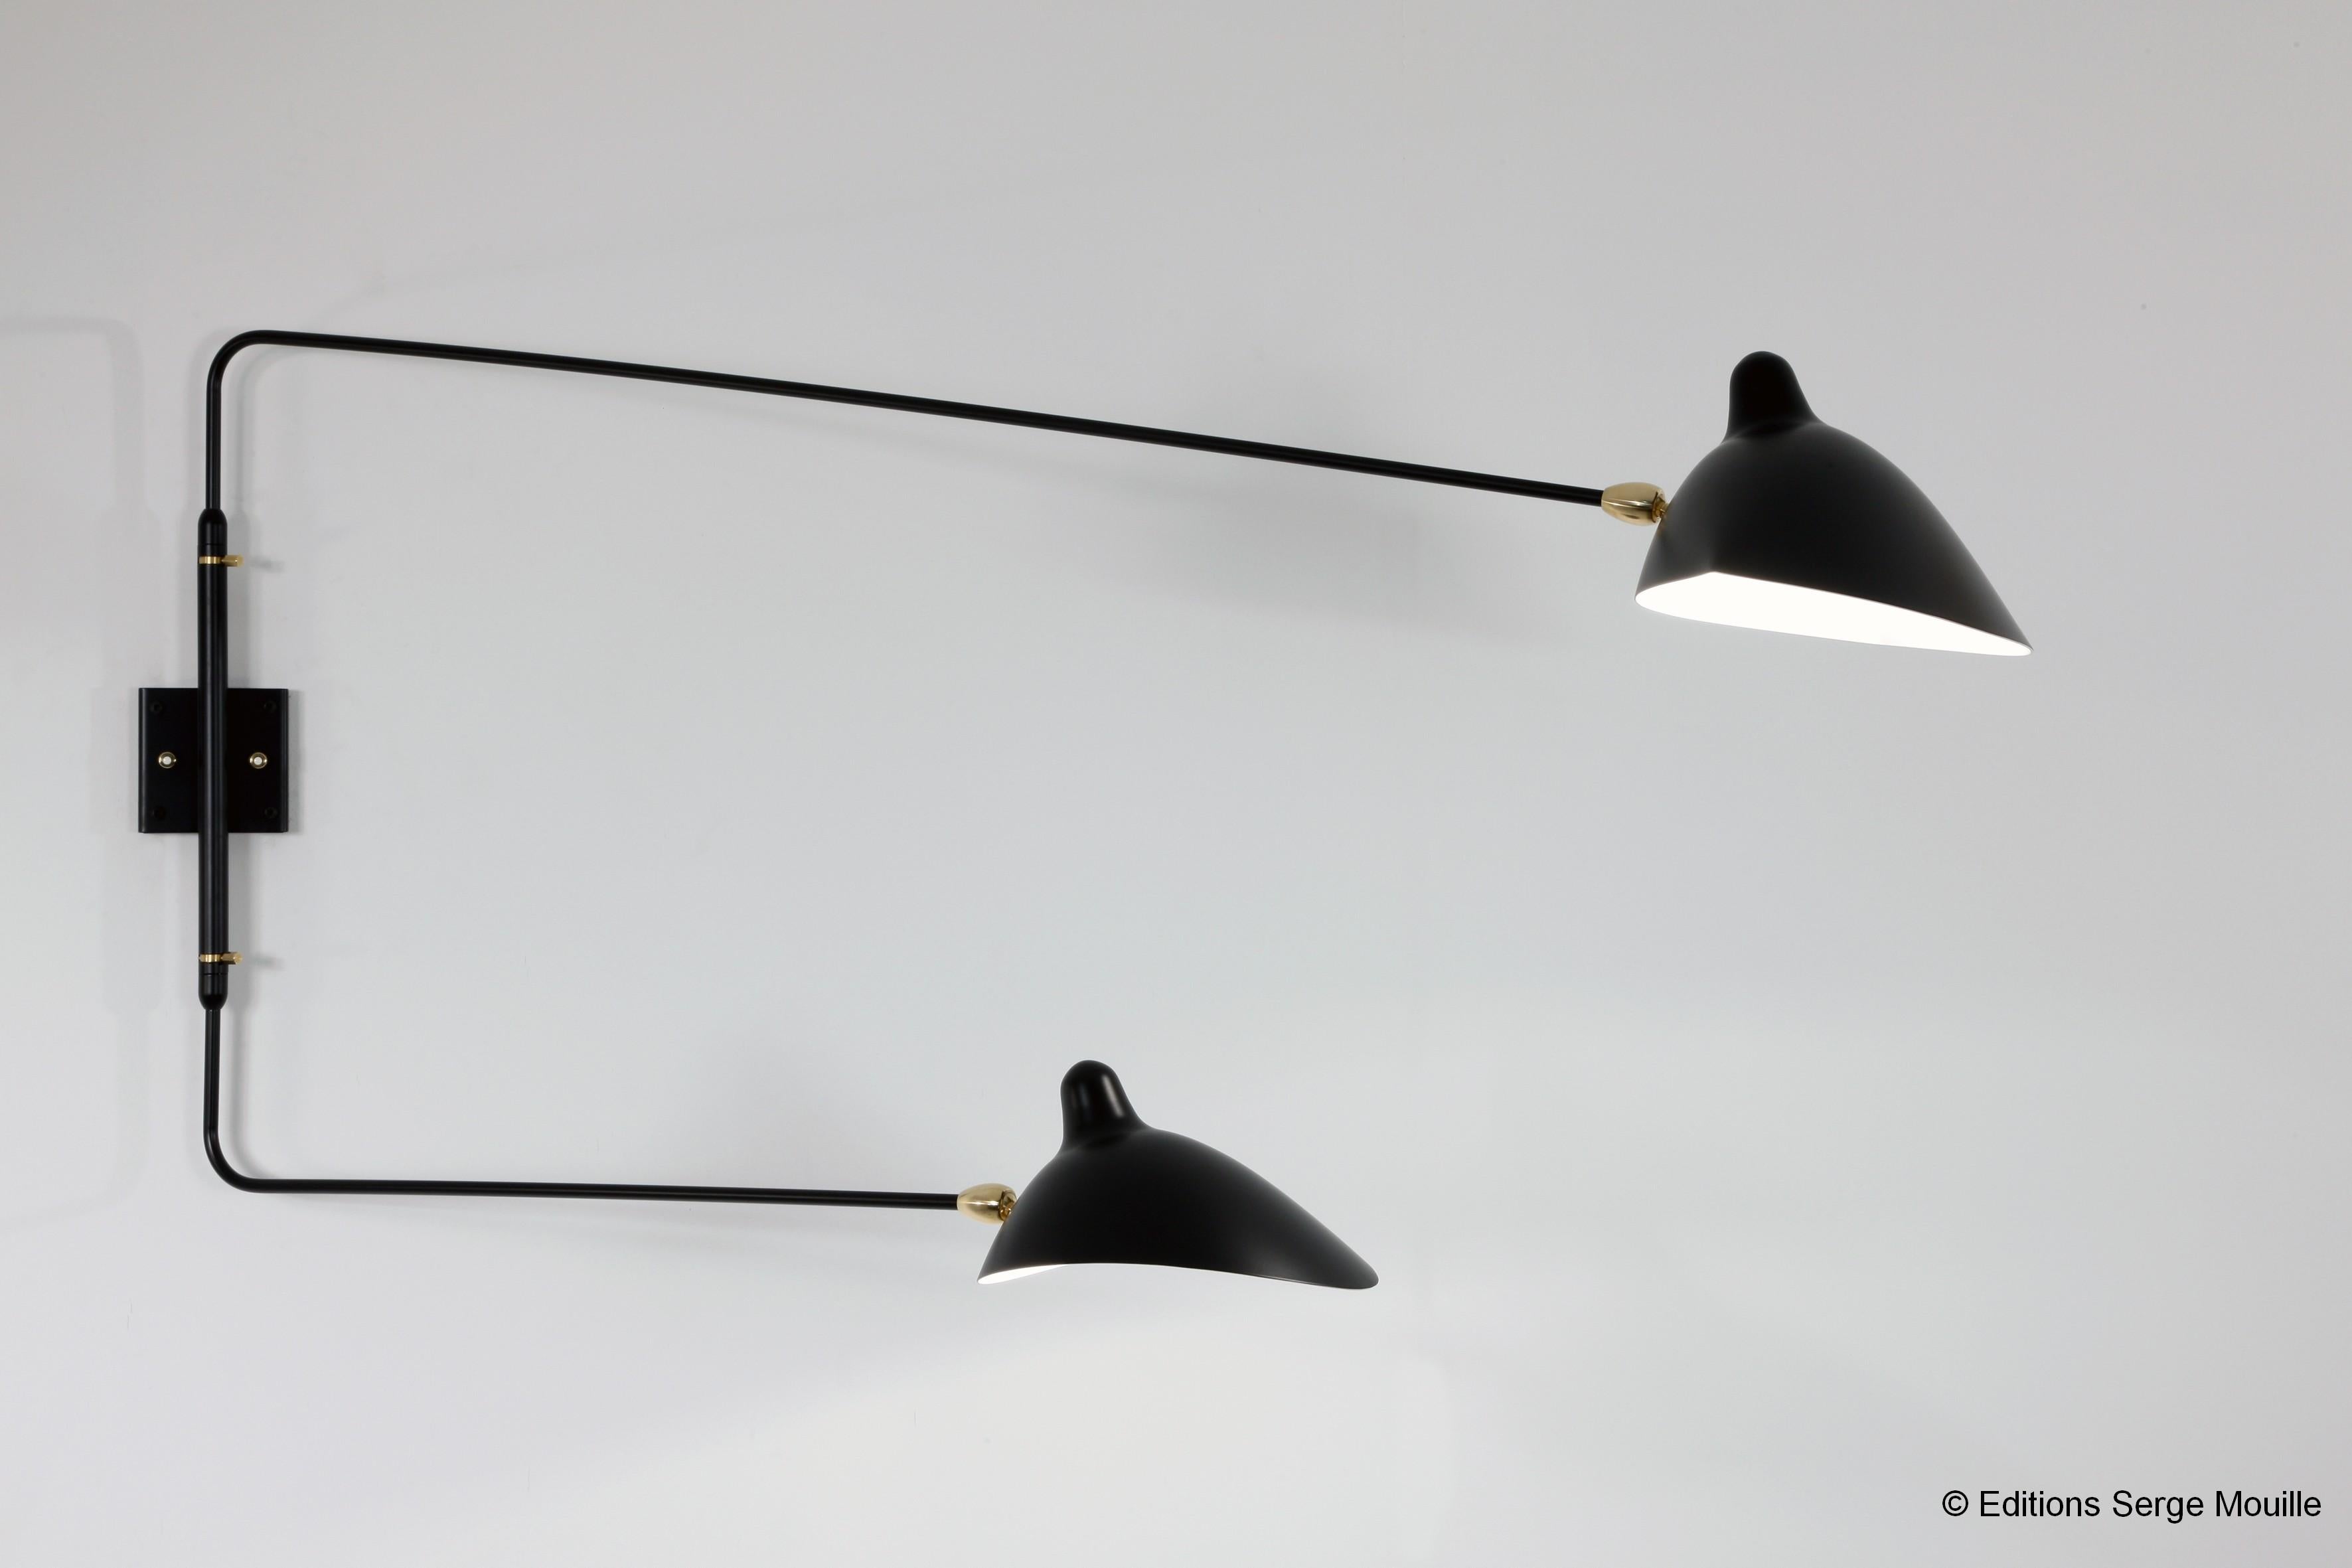 Serge Mouille 'Applique Deux Bras Droits Pivotants' wall light in black.

Originally designed in 1954, this iconic wall light is still made by Edition Serge Mouille in France using many of the same small-scale manufacturing techniques and